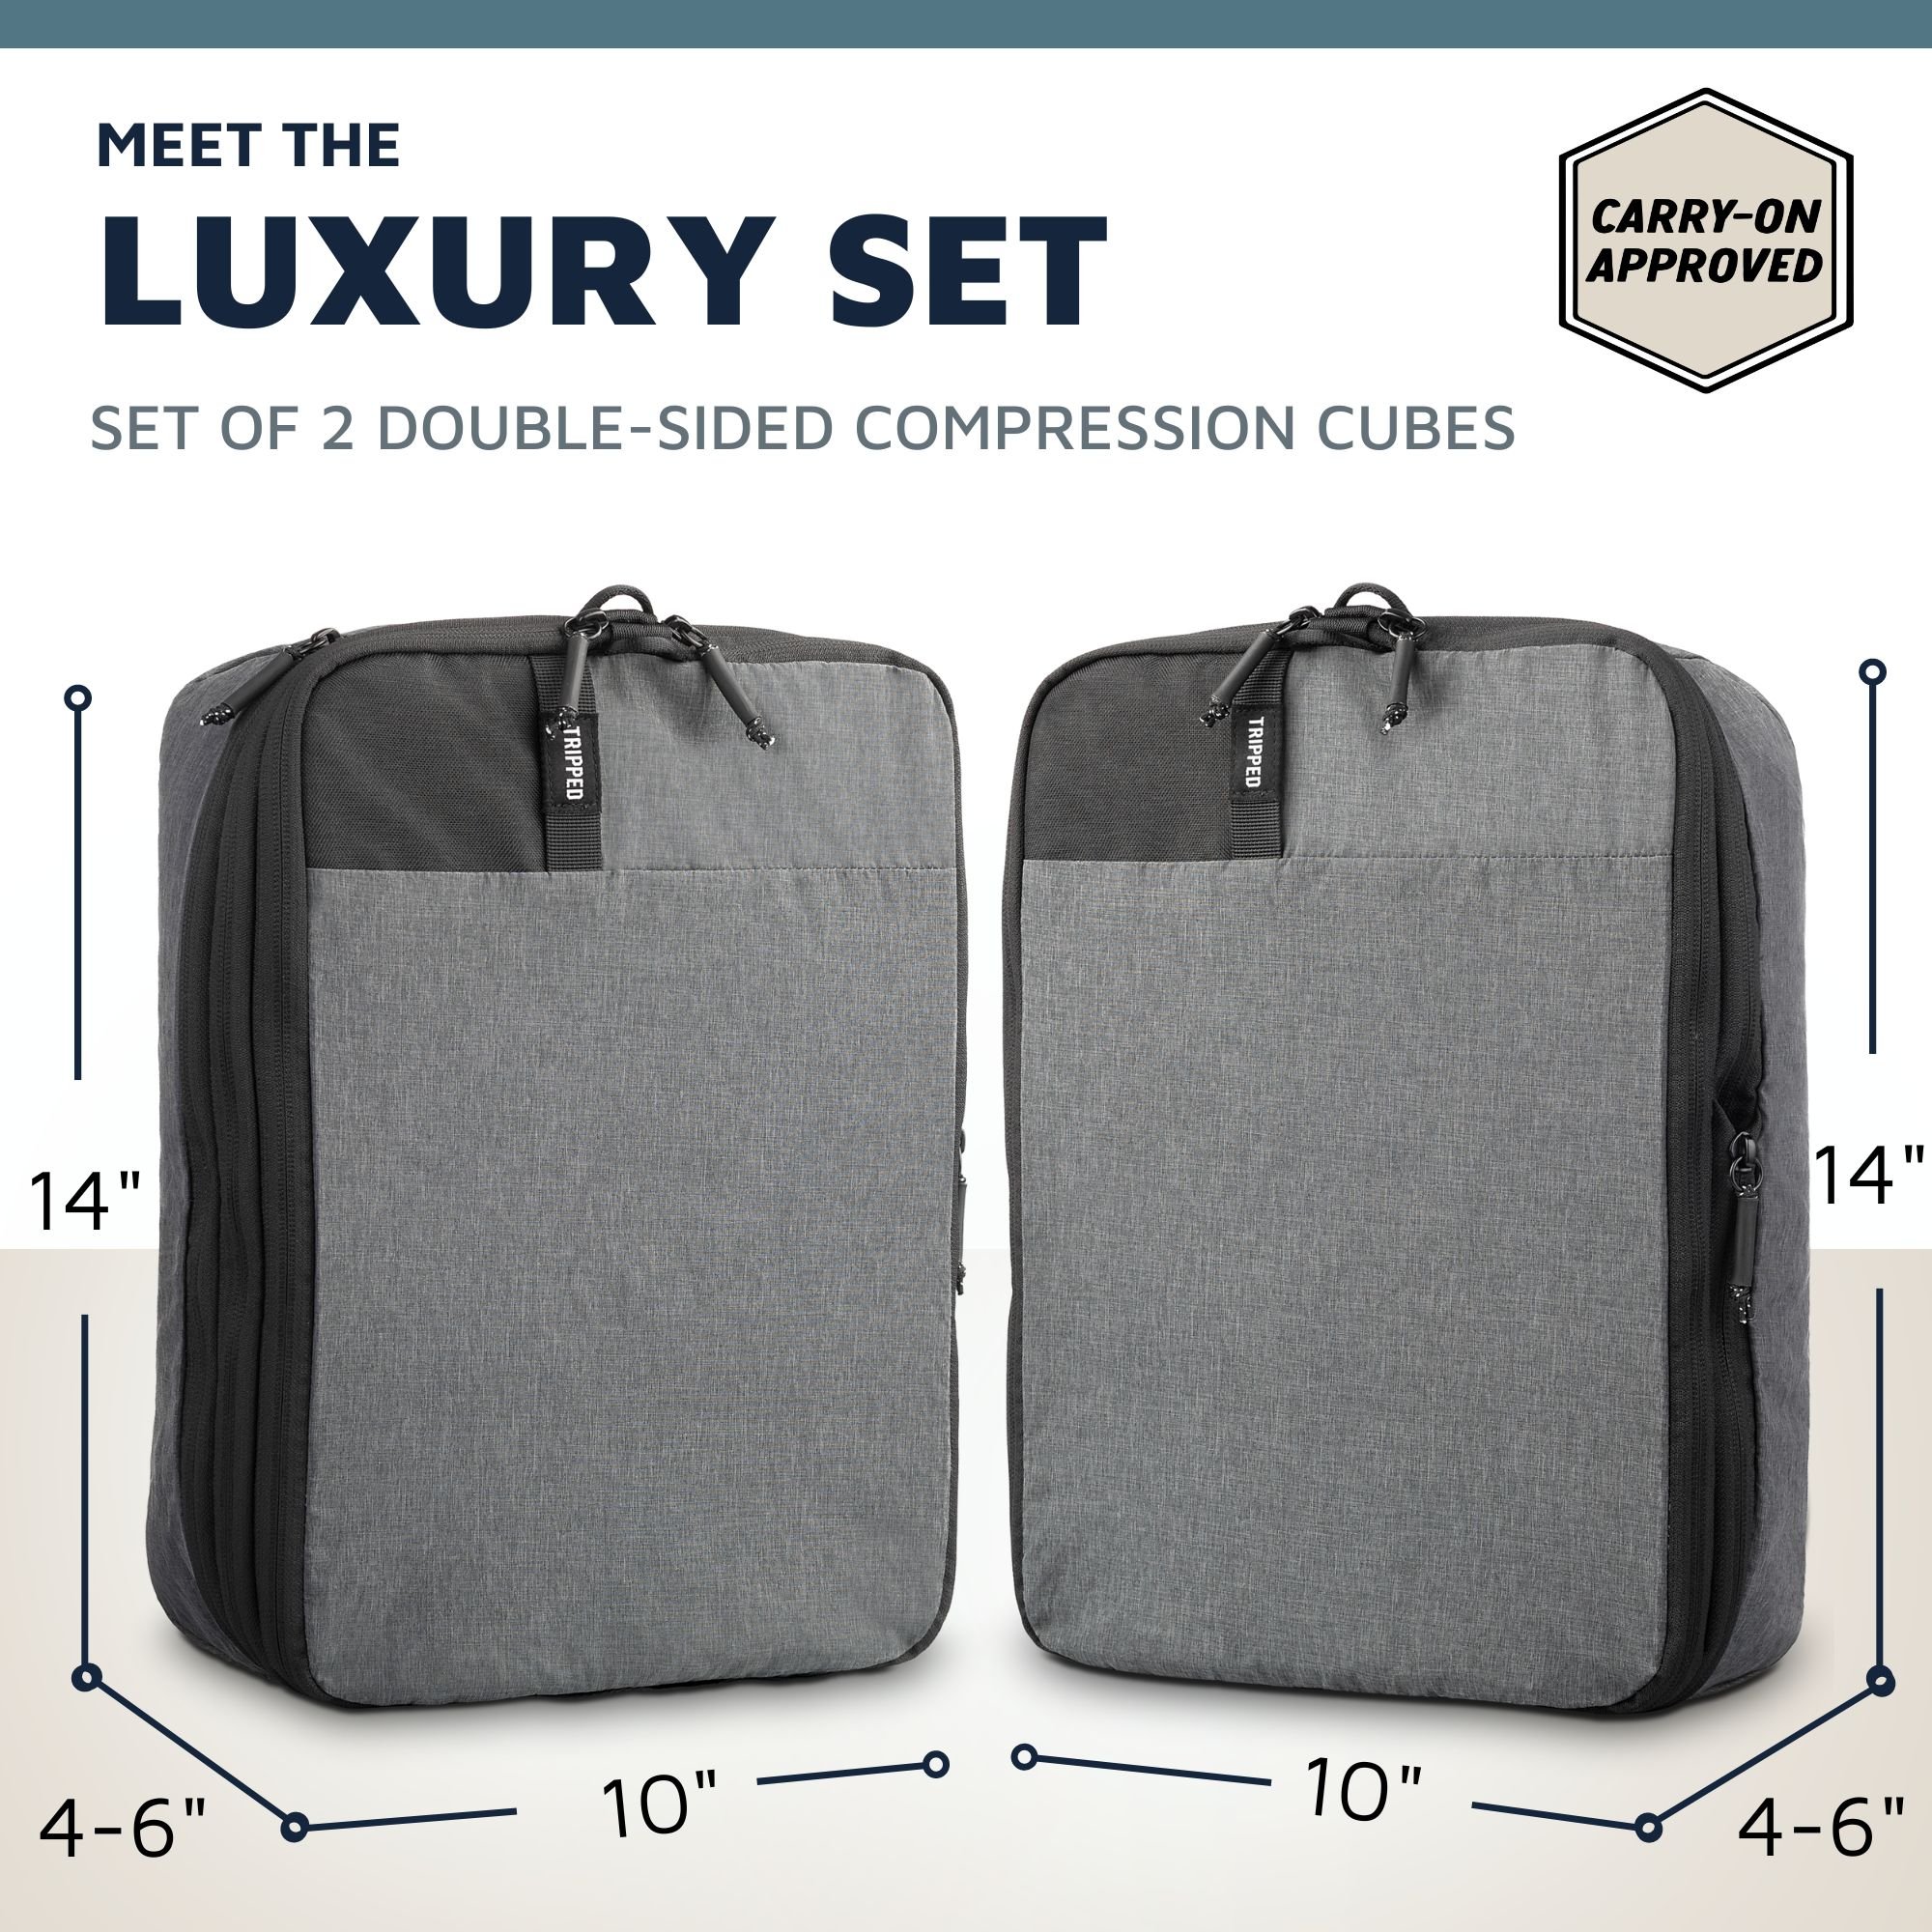 business class packing cubes luxury compression cube grey carry on friendly.jpg